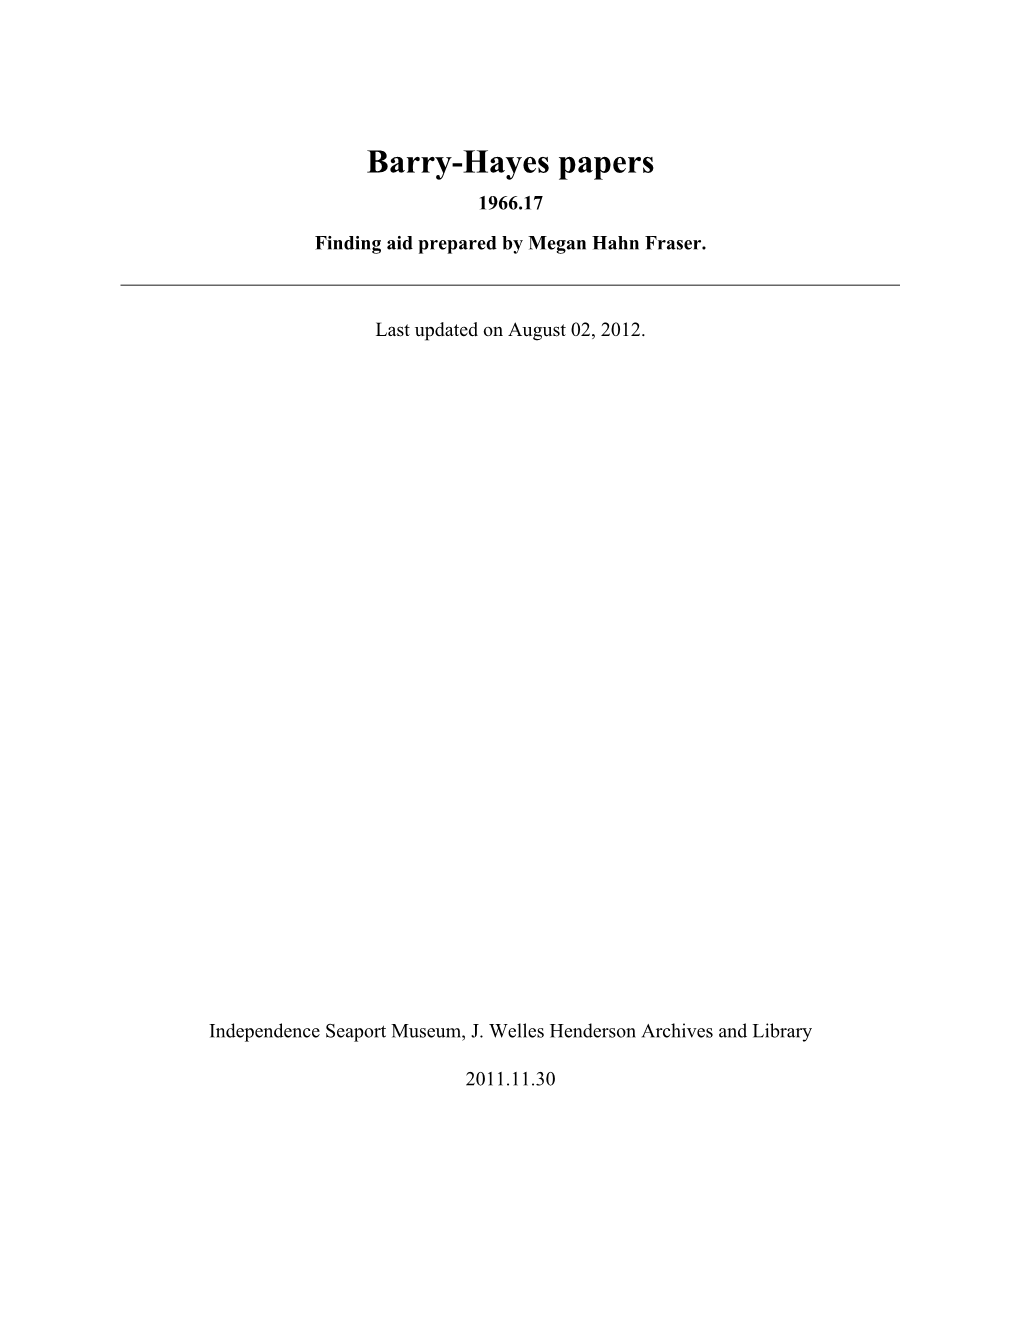 Barry-Hayes Papers 1966.17 Finding Aid Prepared by Megan Hahn Fraser